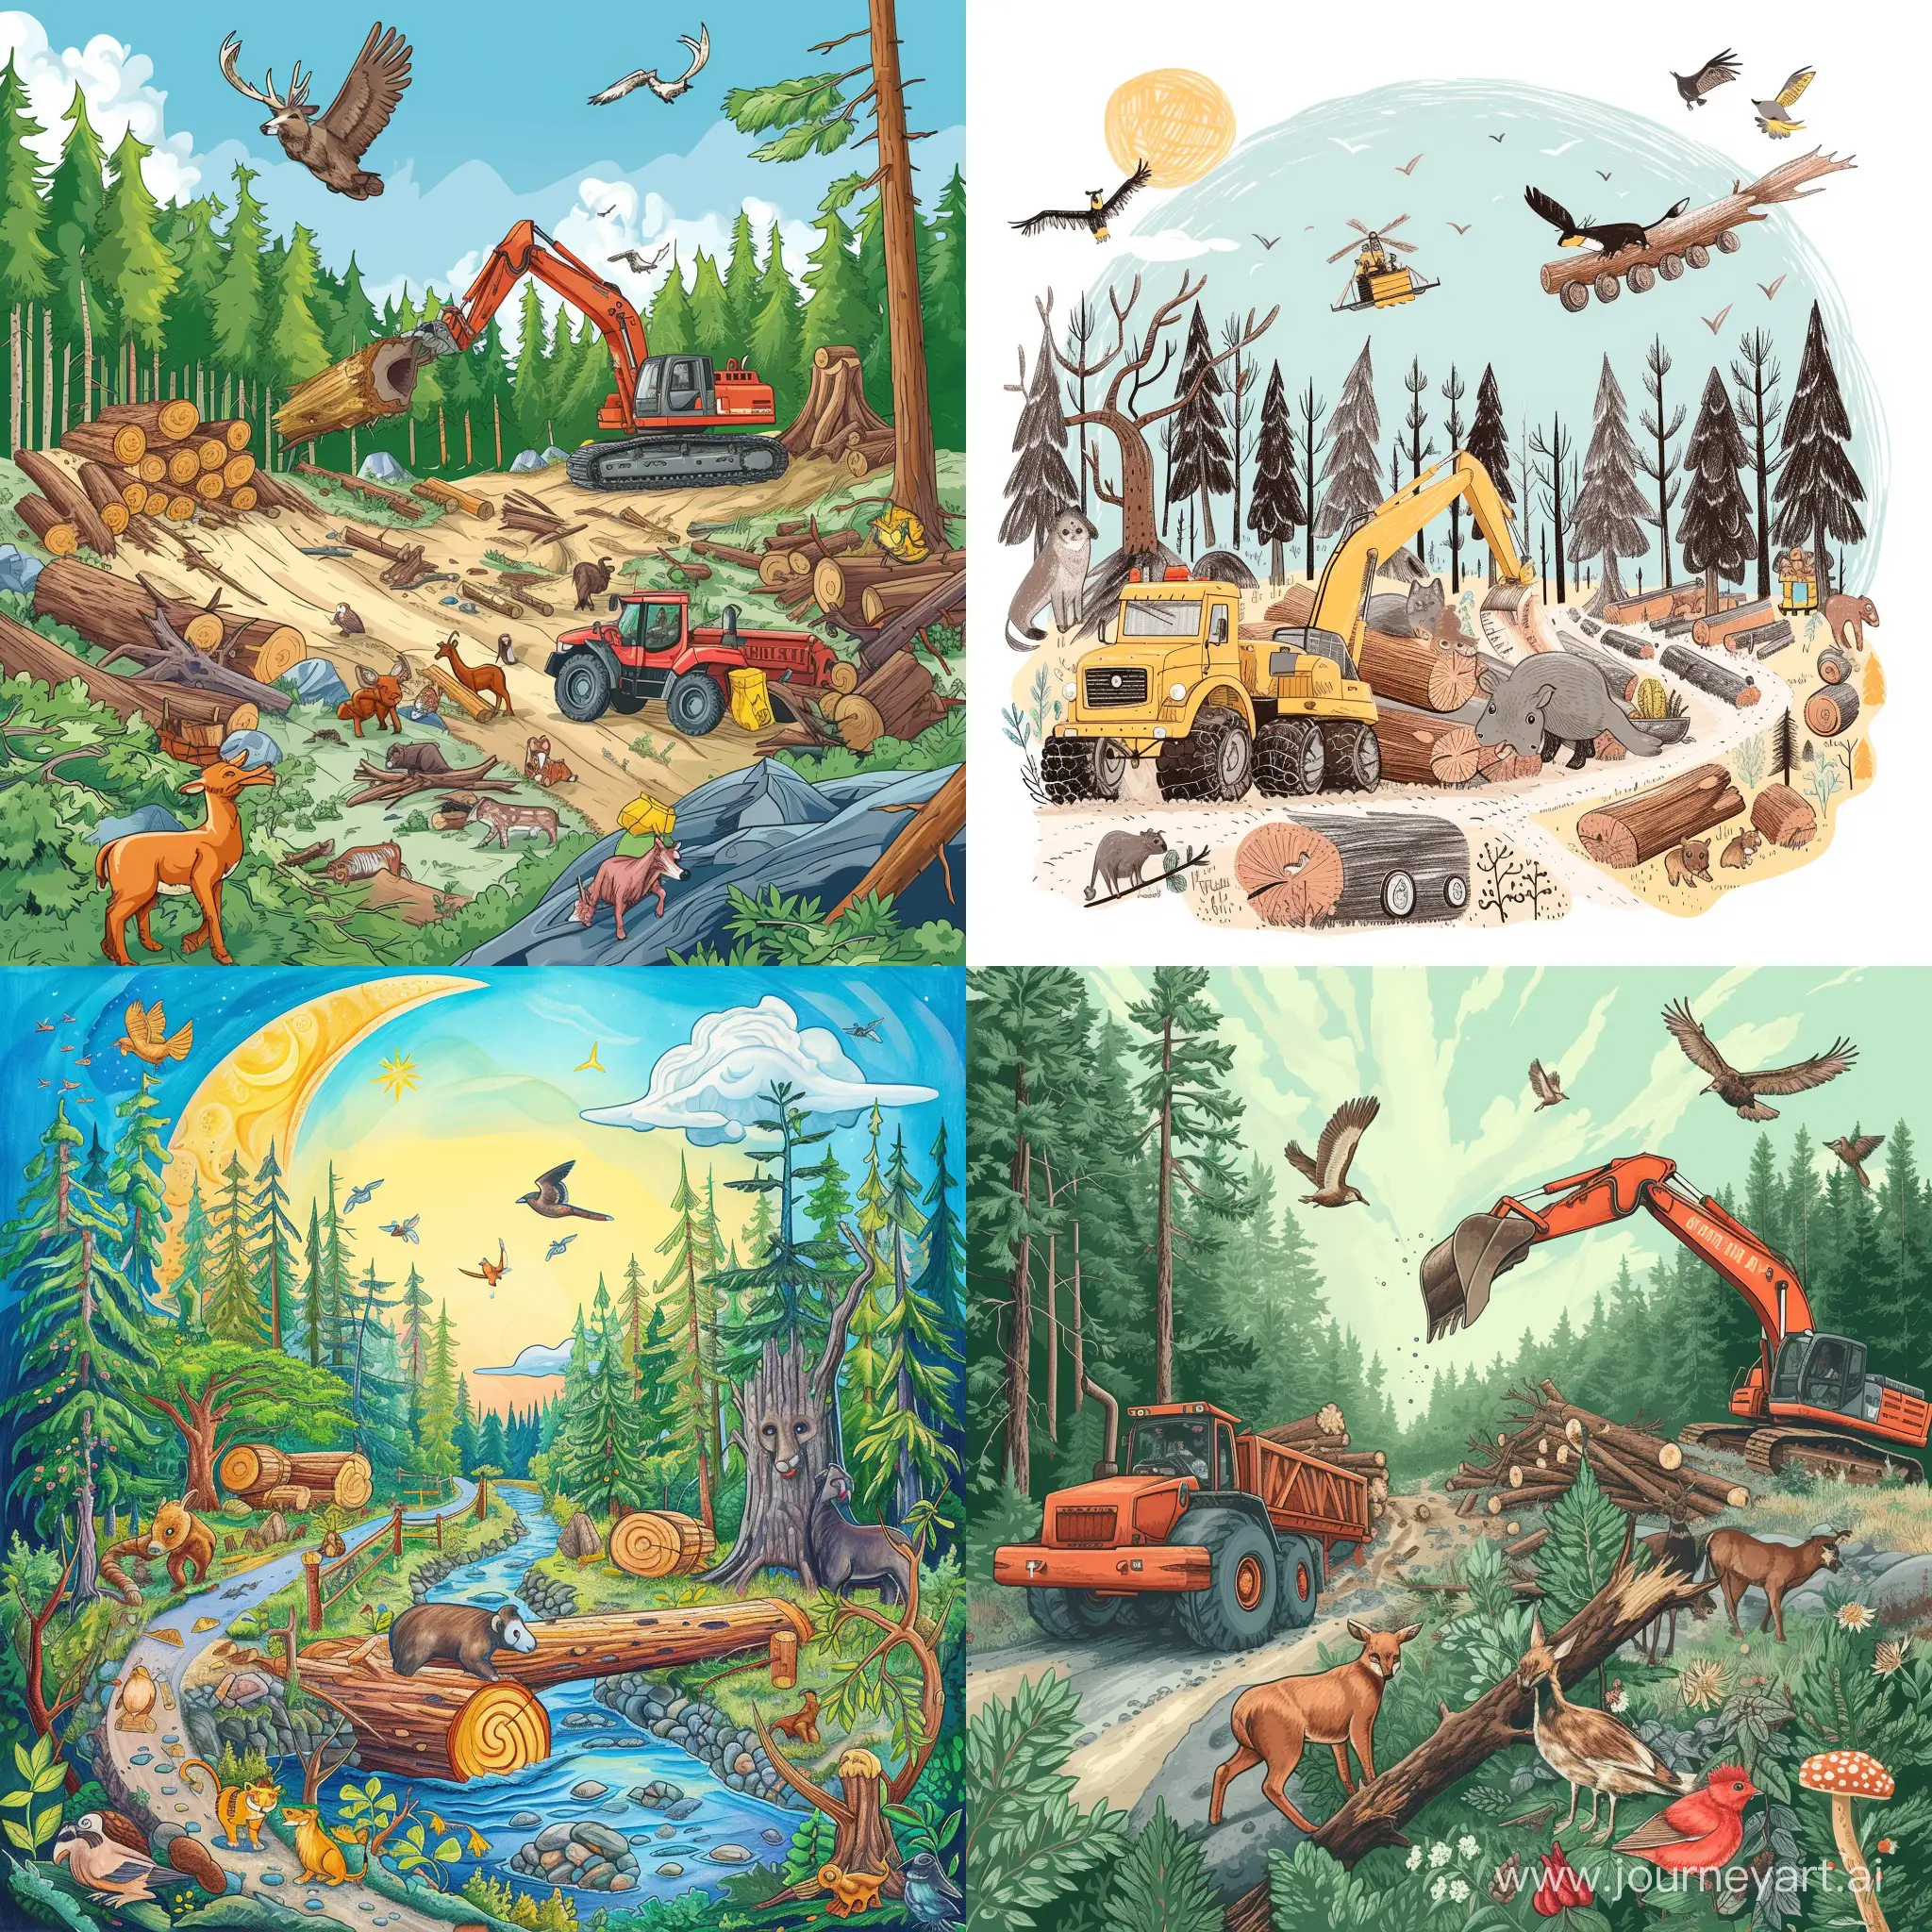 Ecological-Logging-Company-Harmony-Vibrant-Forest-Scene-with-Positive-Animal-Interactions